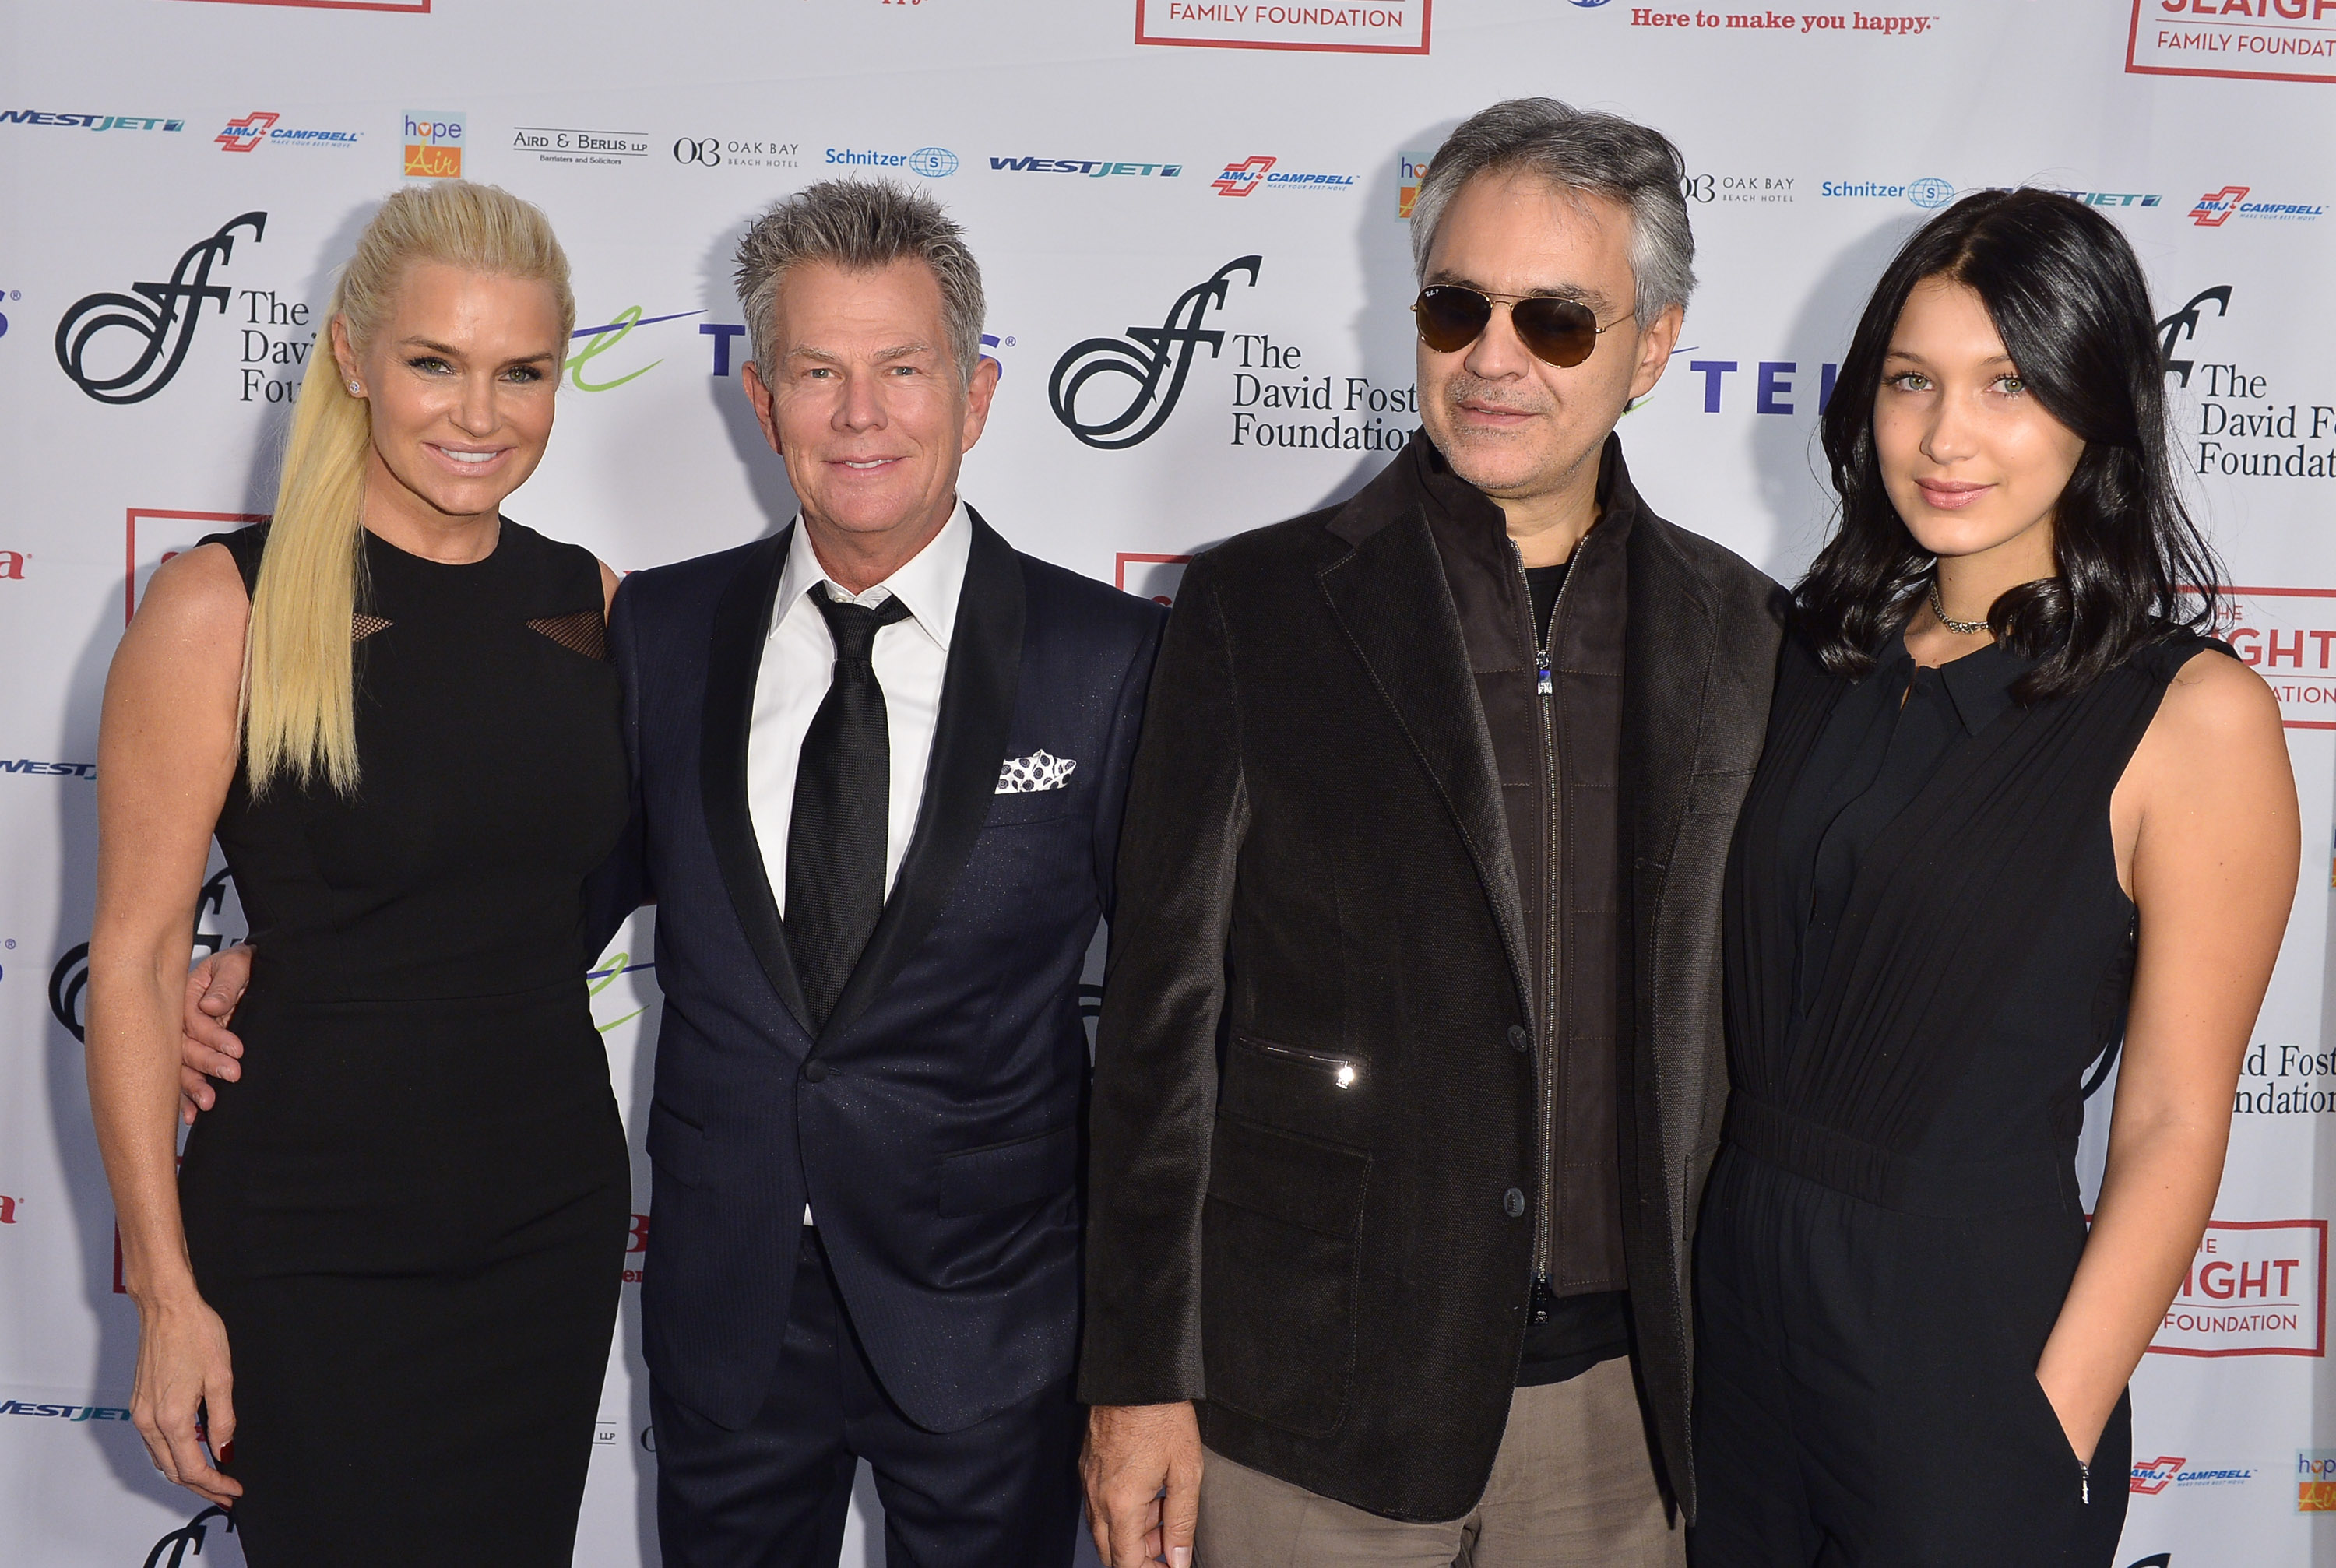 Yolanda Hadid, David Foster, Andrea Bocelli, and the girl at the David Foster Foundation benefit concert in Toronto, Canada on December 5, 2013 | Source: Getty Images